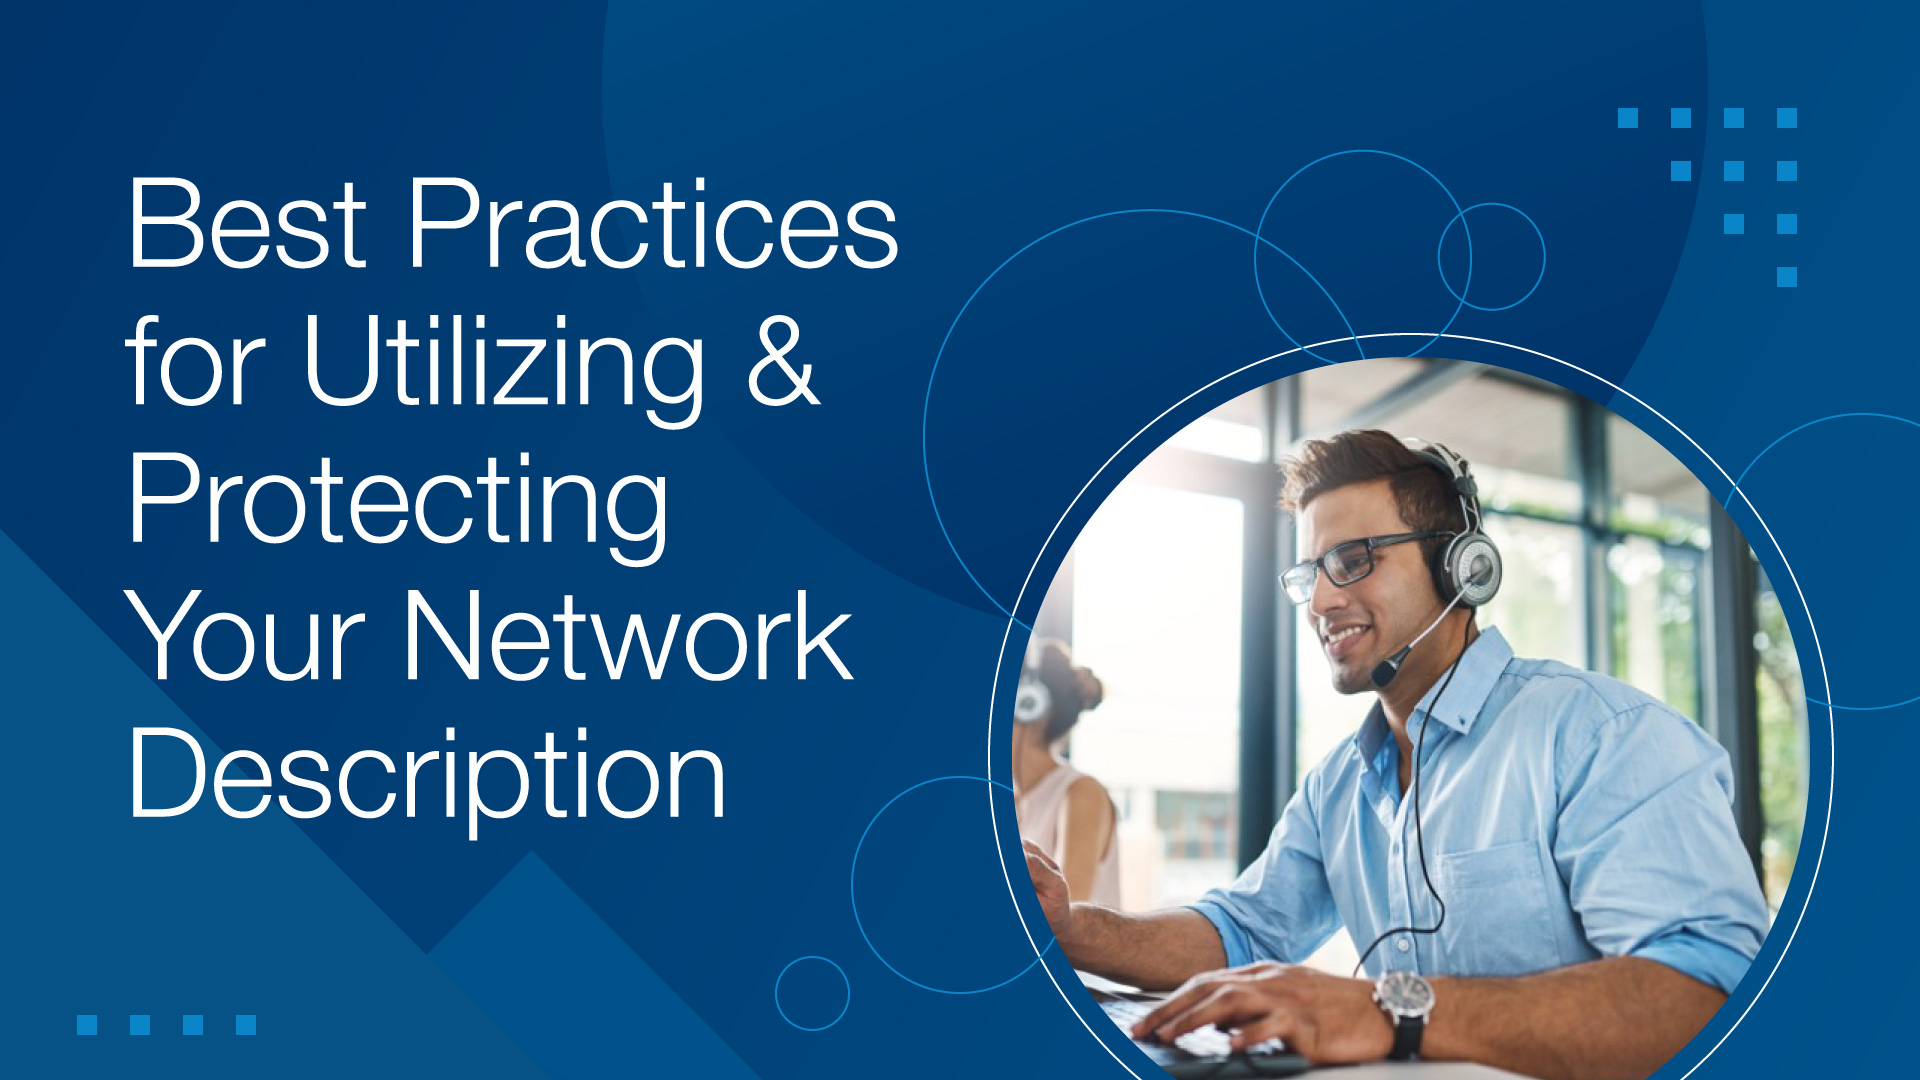 Best Practices for Utilizing and Protecting your Network